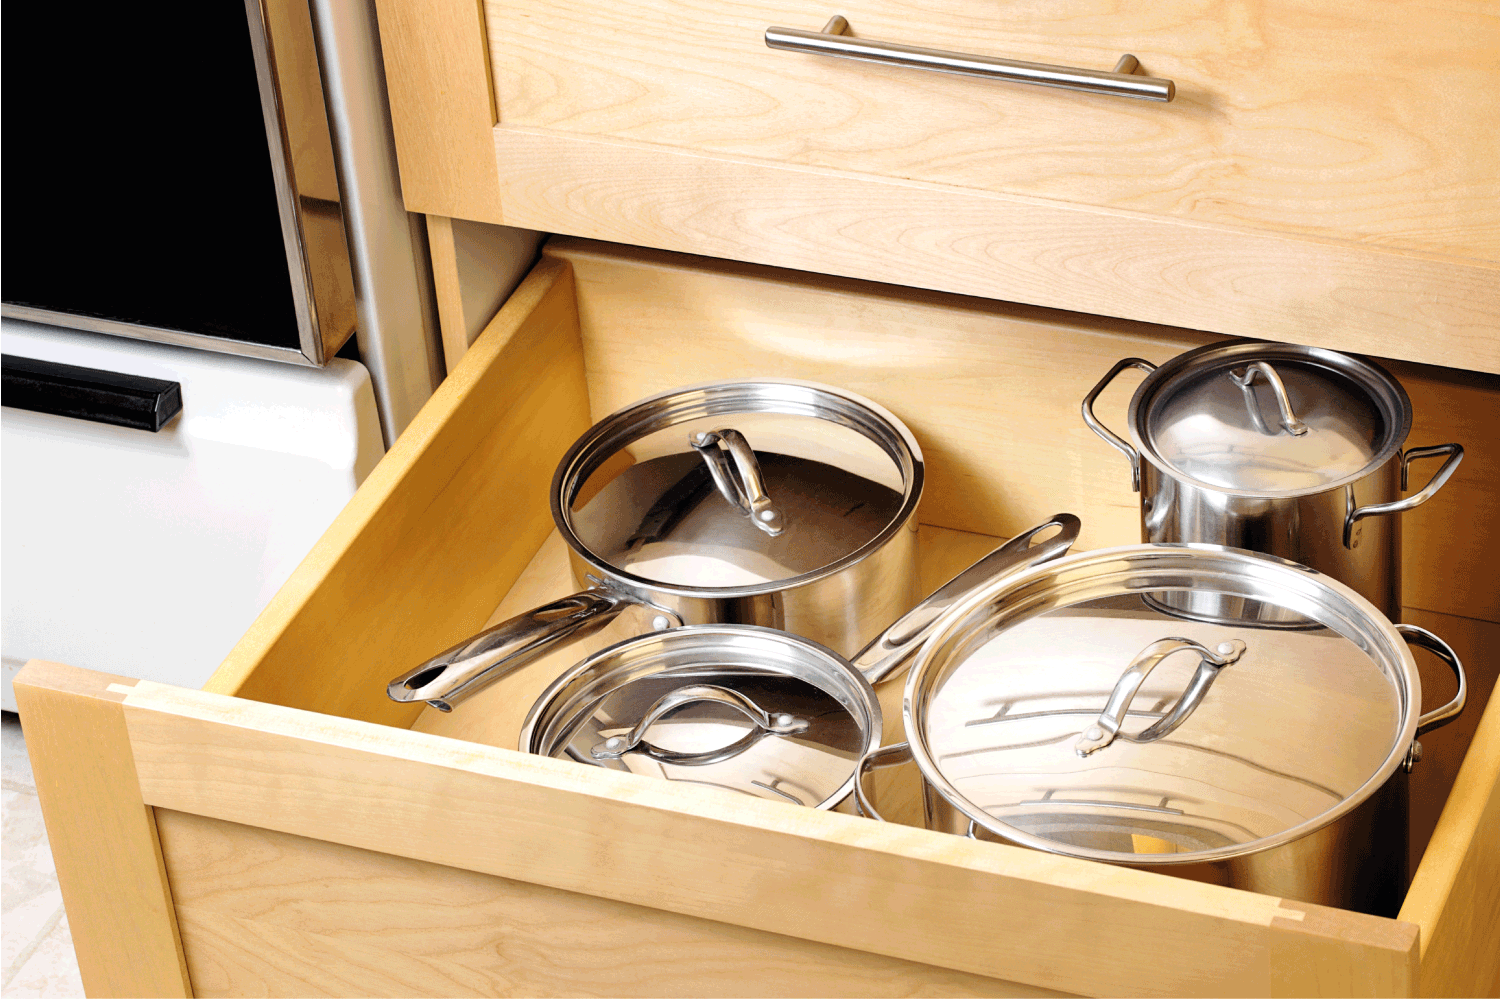 Organized kitchen drawer with stainless steel pots and pans